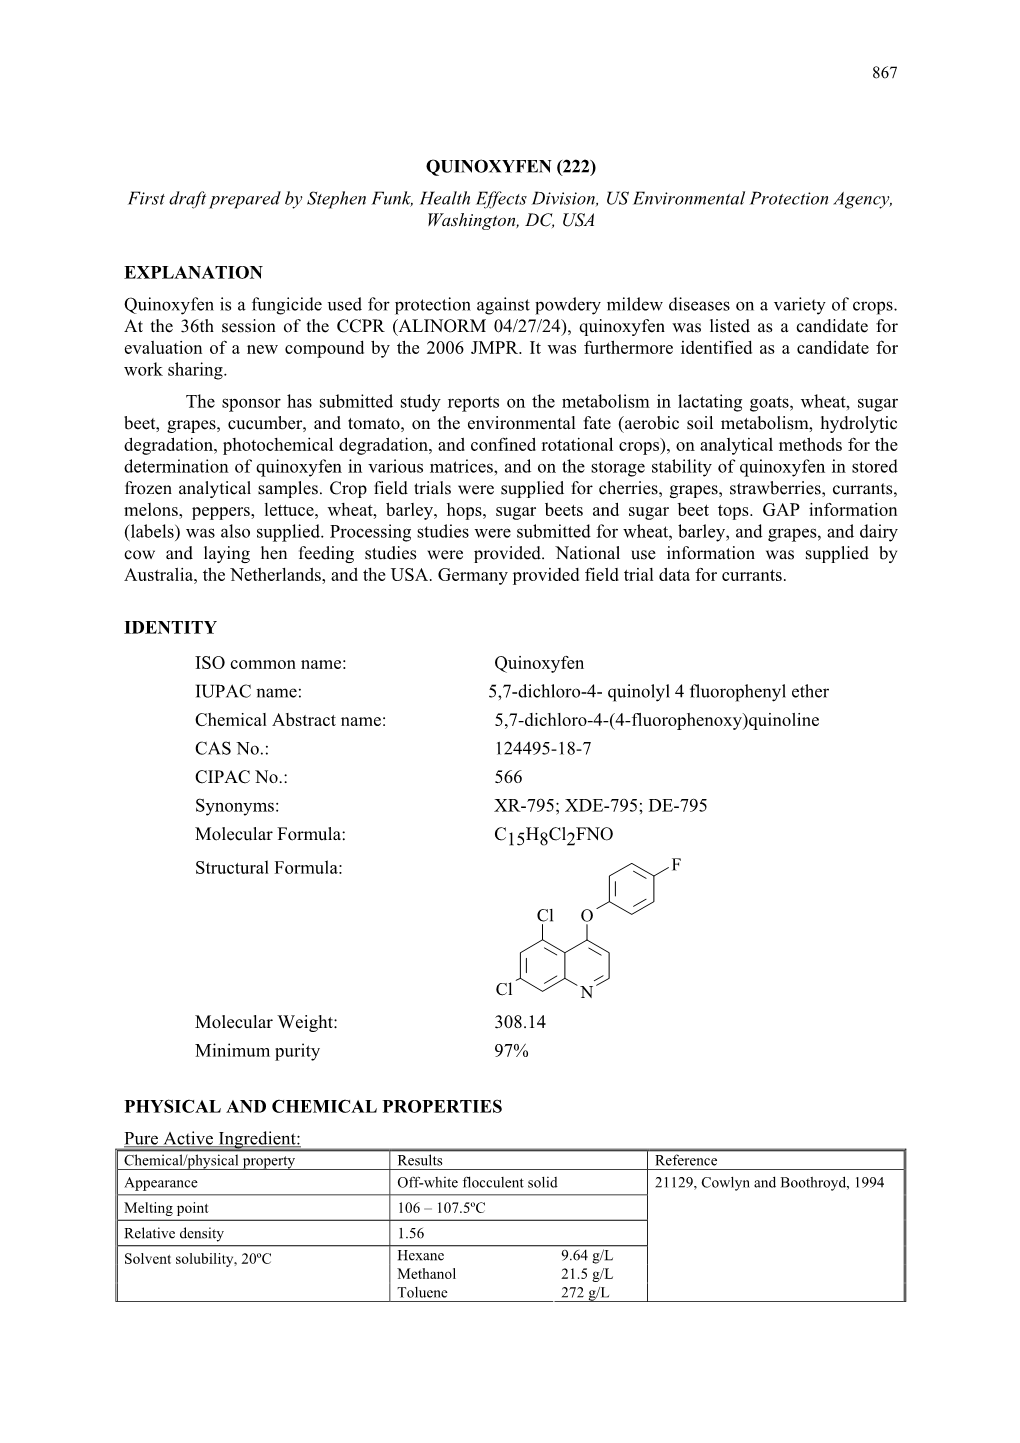 QUINOXYFEN (222) First Draft Prepared by Stephen Funk, Health Effects Division, US Environmental Protection Agency, Washington, DC, USA